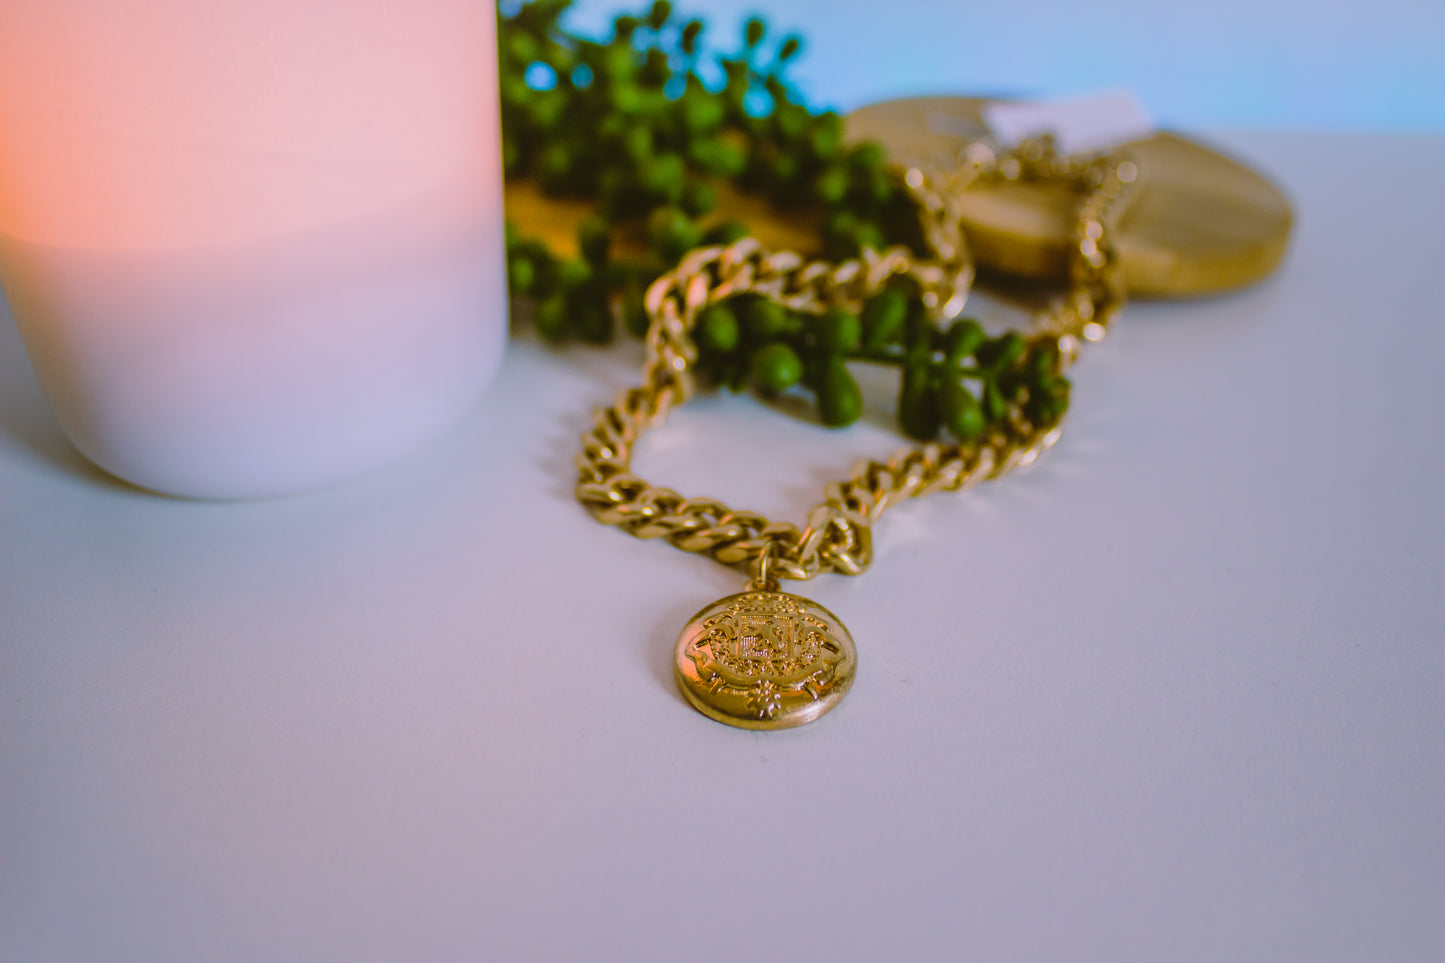 FOUR CORNERS NECKLACE - GOLD CHAIN WITH MEDALION